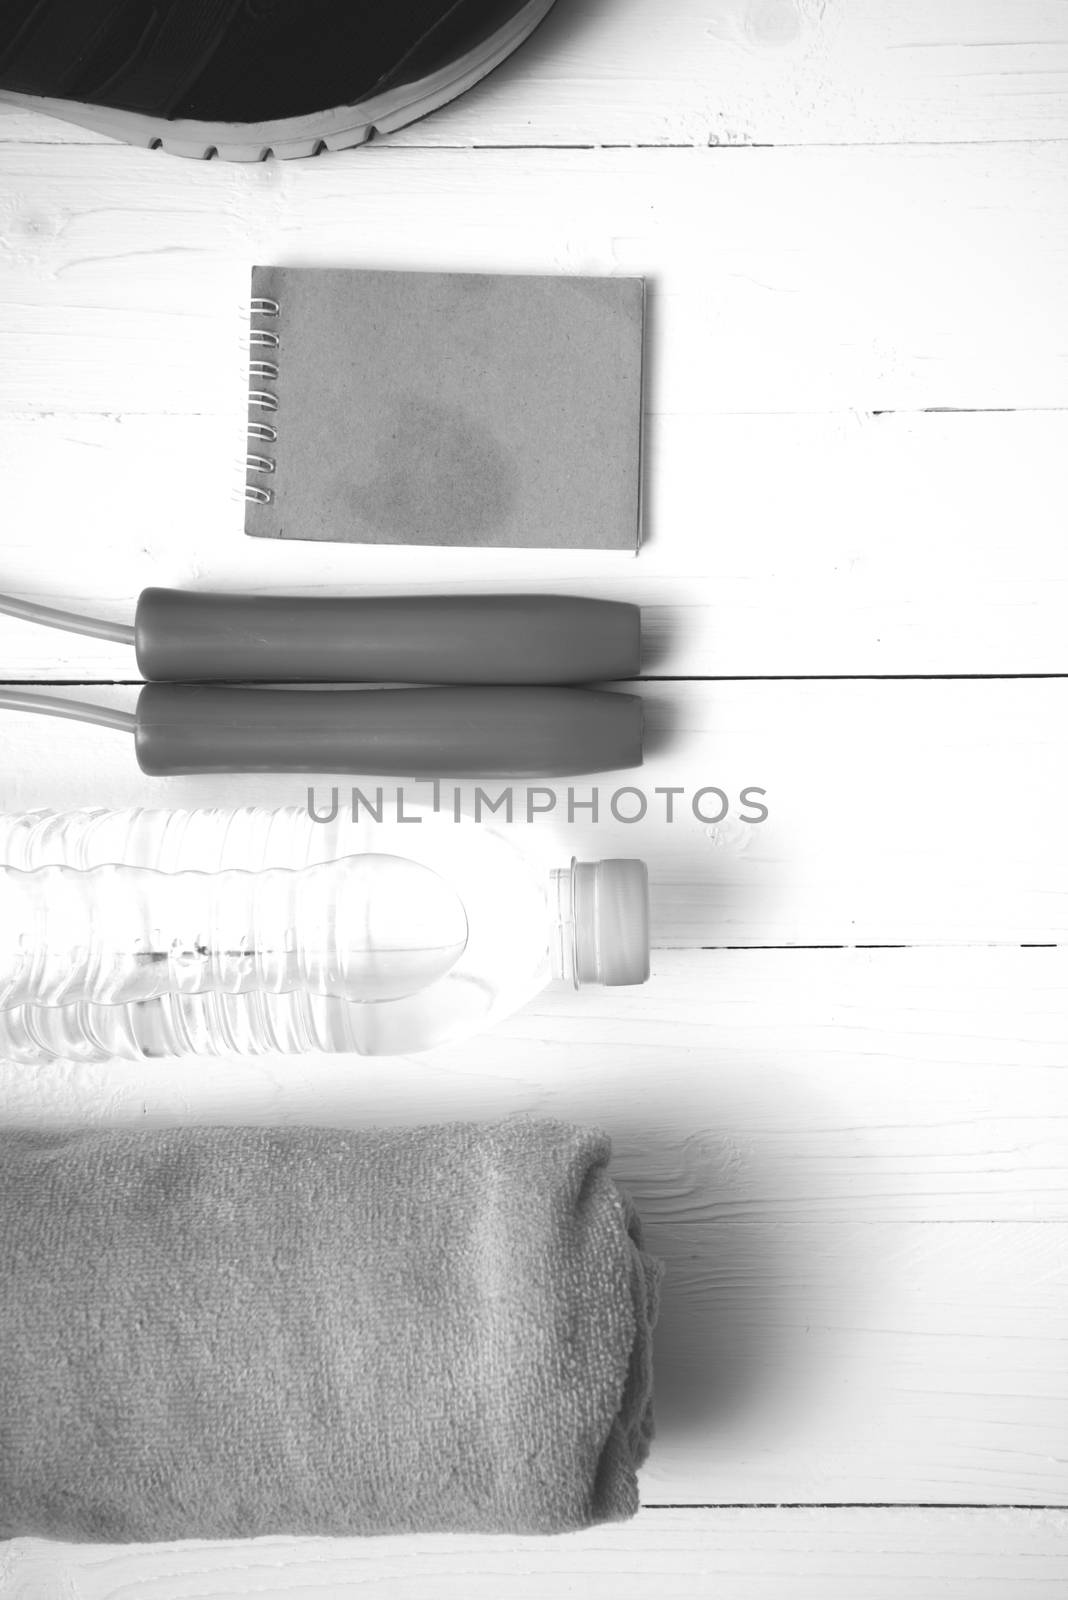 fitness equipment : running shoes,towel,jumping rope,water bottle and notepad on white wood table black and white color tone style